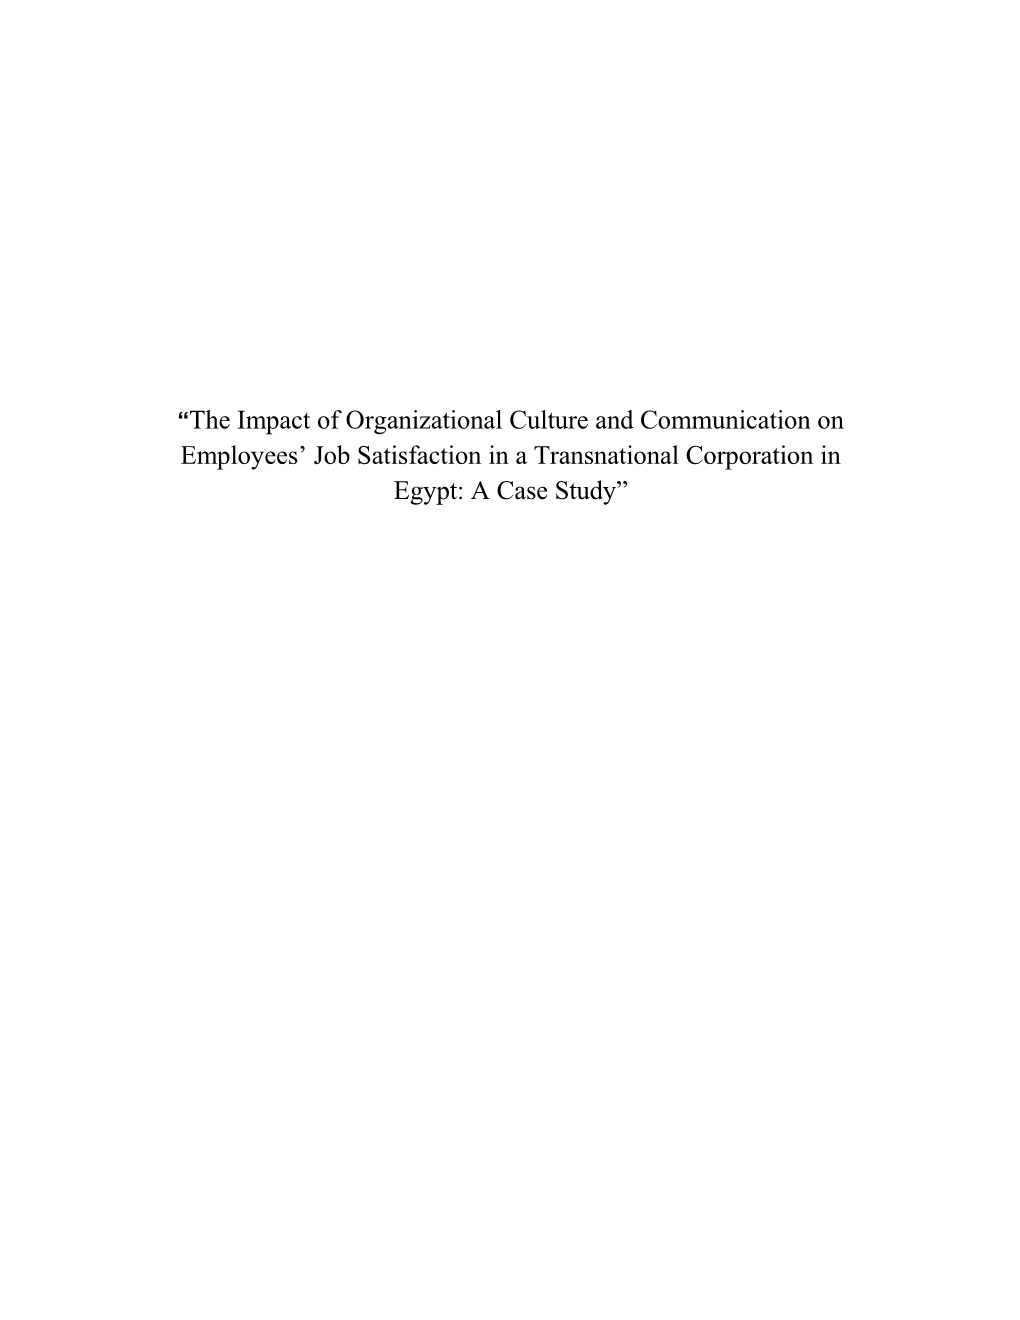 The Impact of Organizational Culture and Communication on Employees Job Satisfactionin